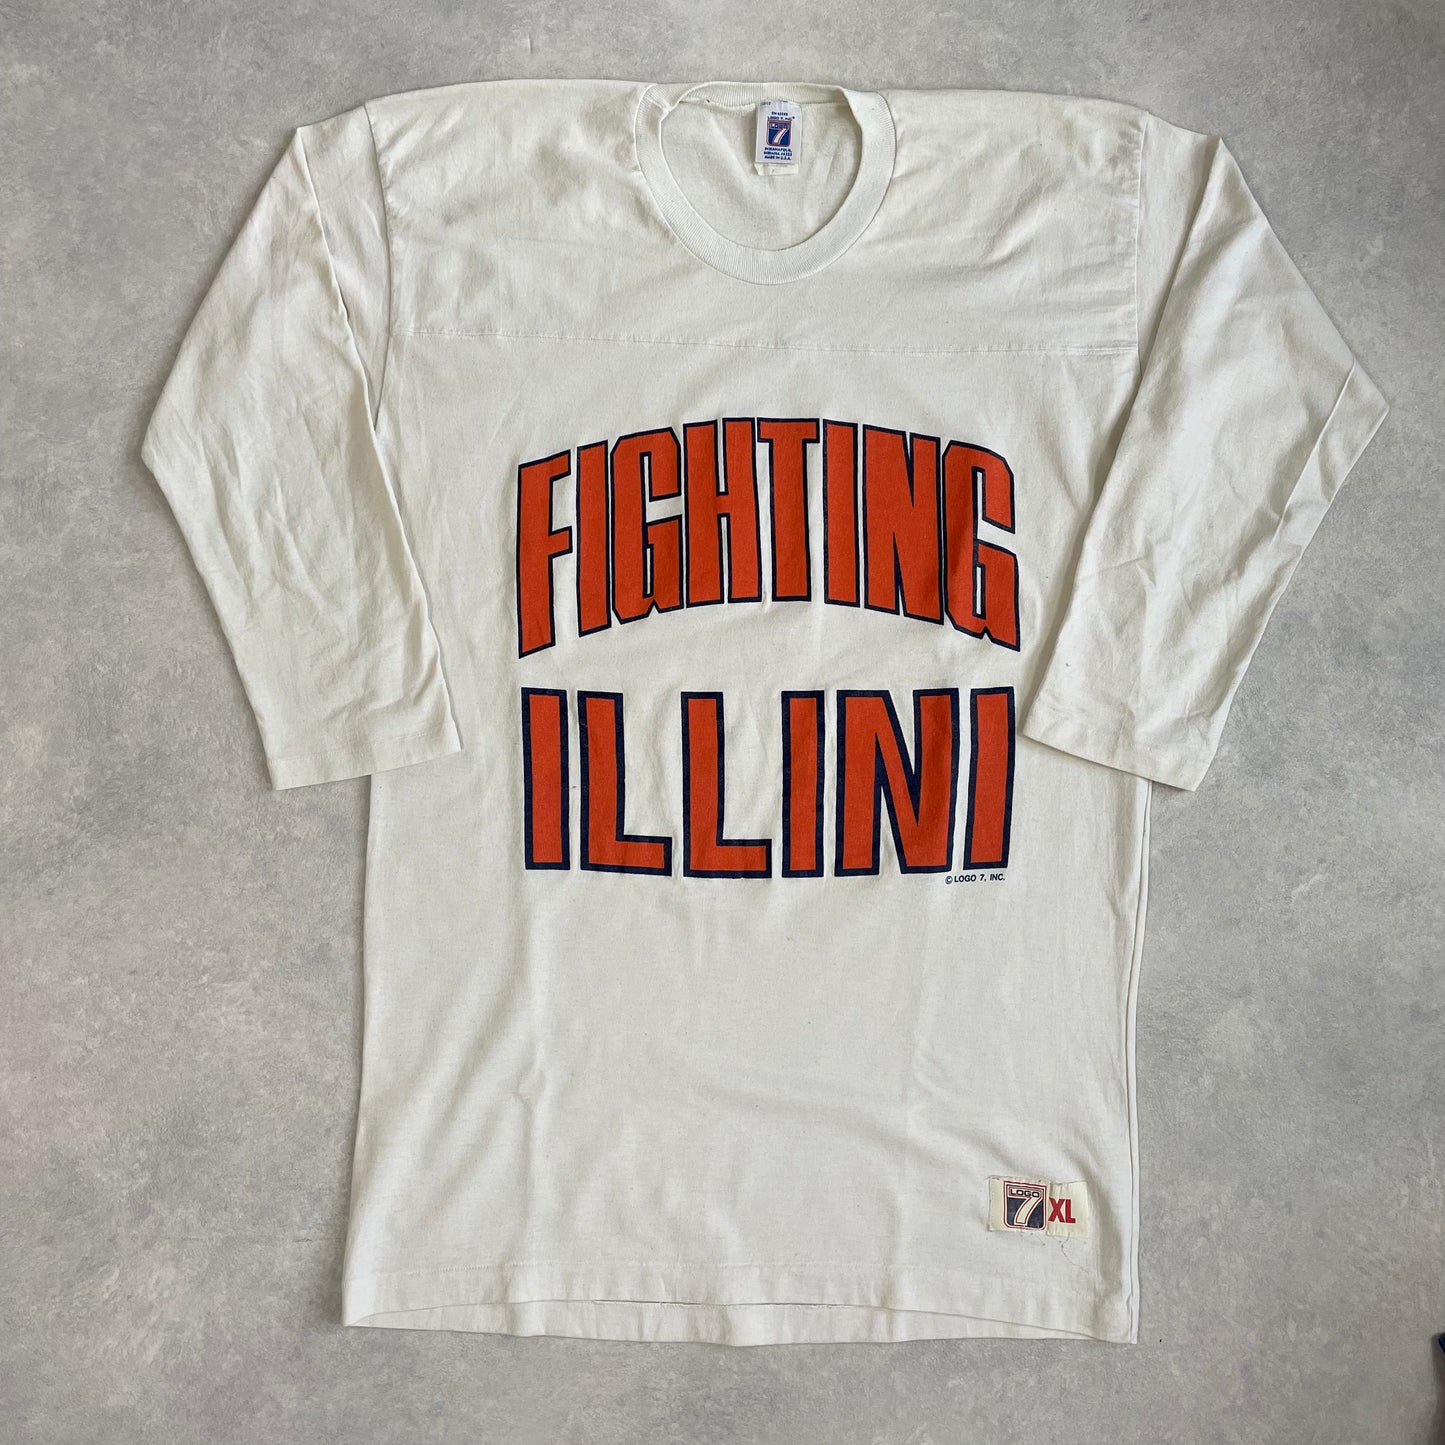 Vintage Single Stitch T-Shirt Fighting Illini by Logo 7 Made in USA